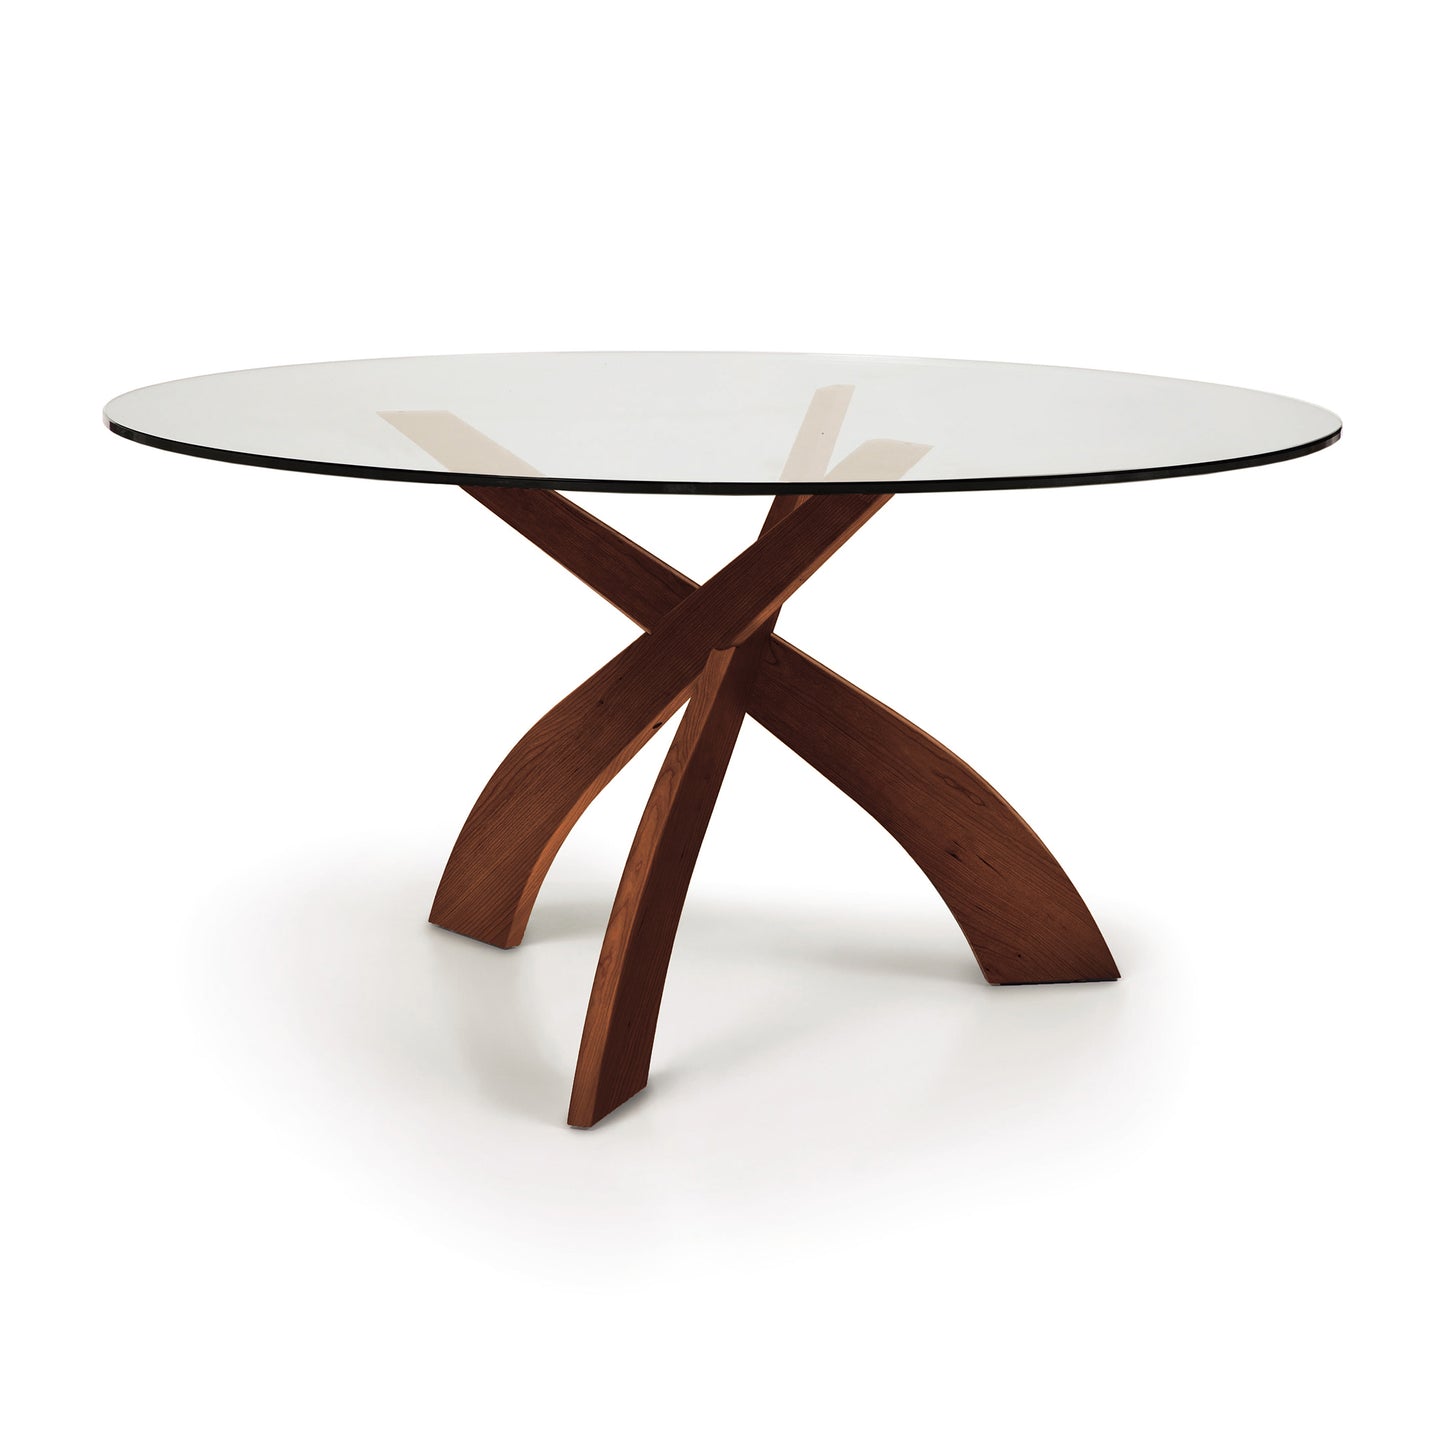 Entwine Round Glass Top Dining Table by Copeland Furniture with an intersecting sustainably sourced cherry wood base on a white background.